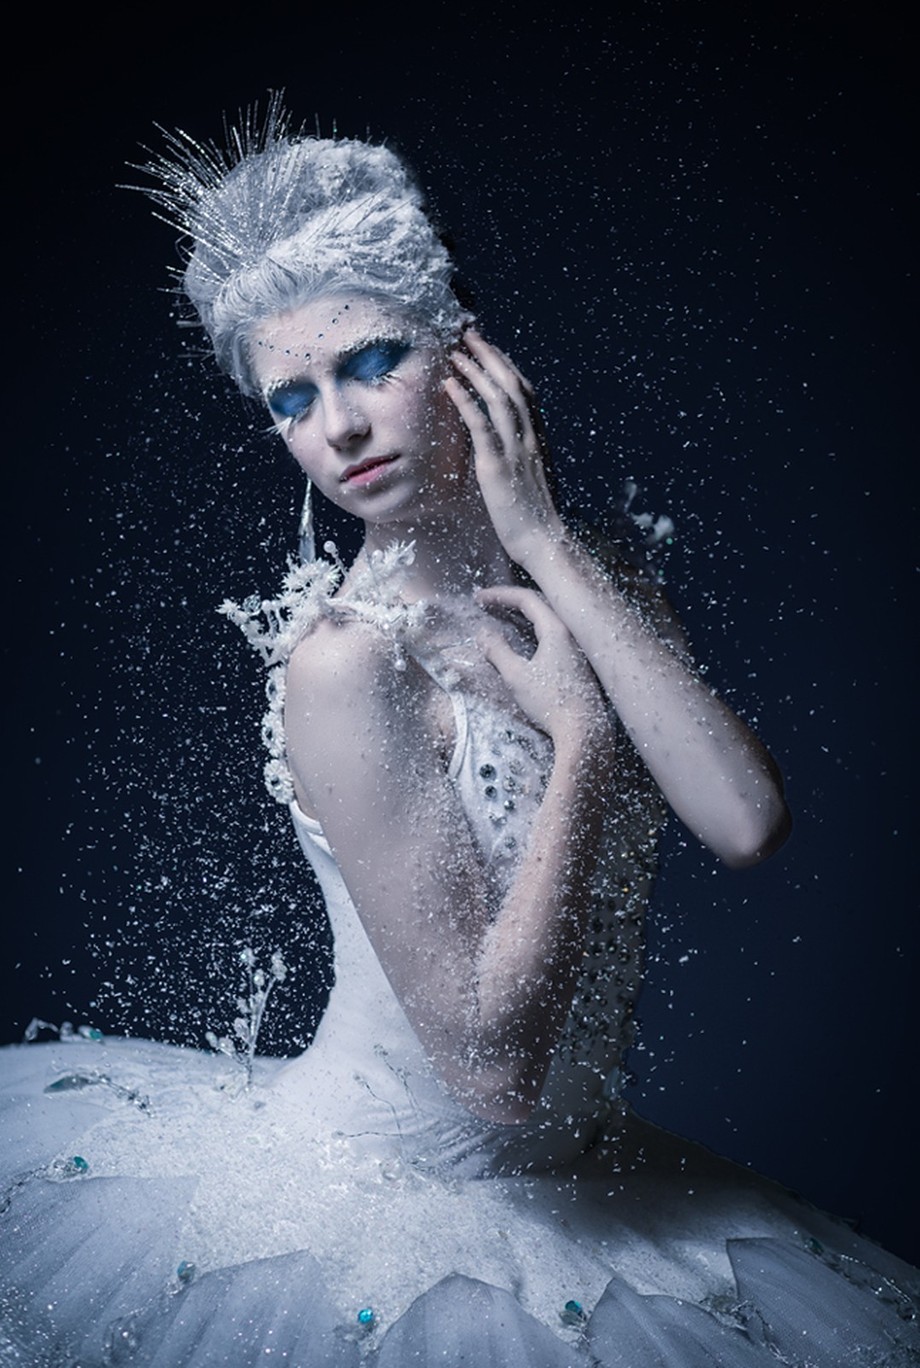 Snow Queen by kateluber - A Fantasy World Photo Contest